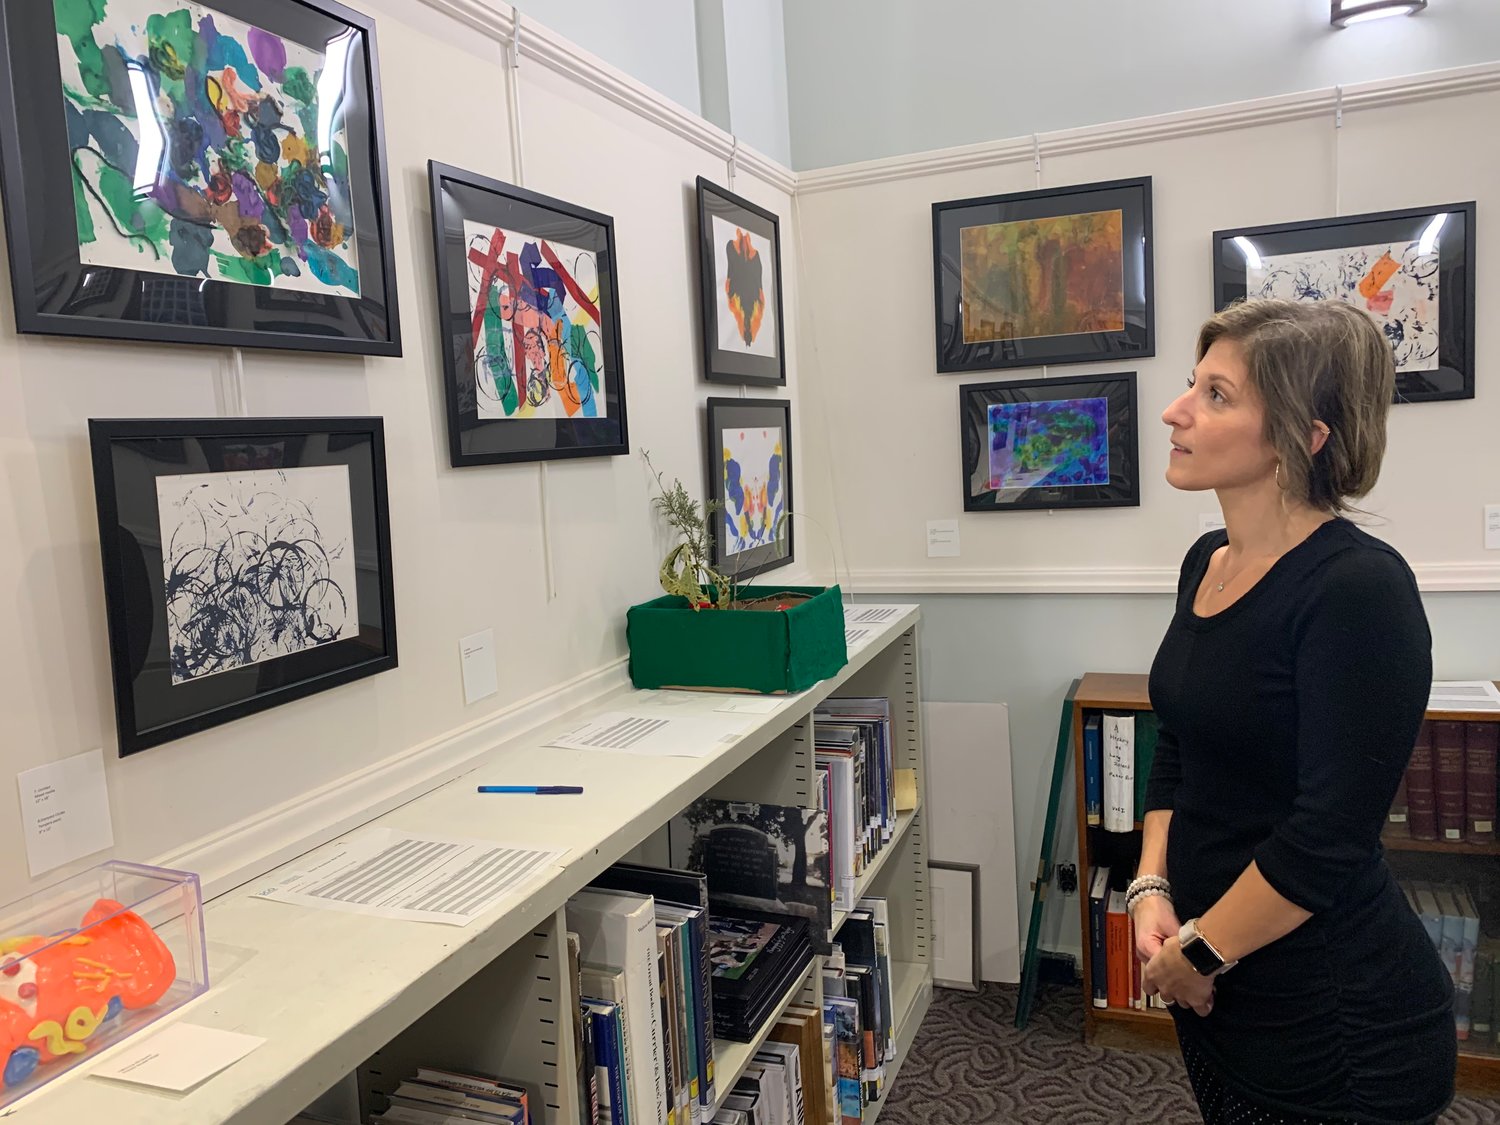 Clinical art therapist Suzanna Shayer is proud to display the artwork made by young people with intellectual disabilities at SCO.